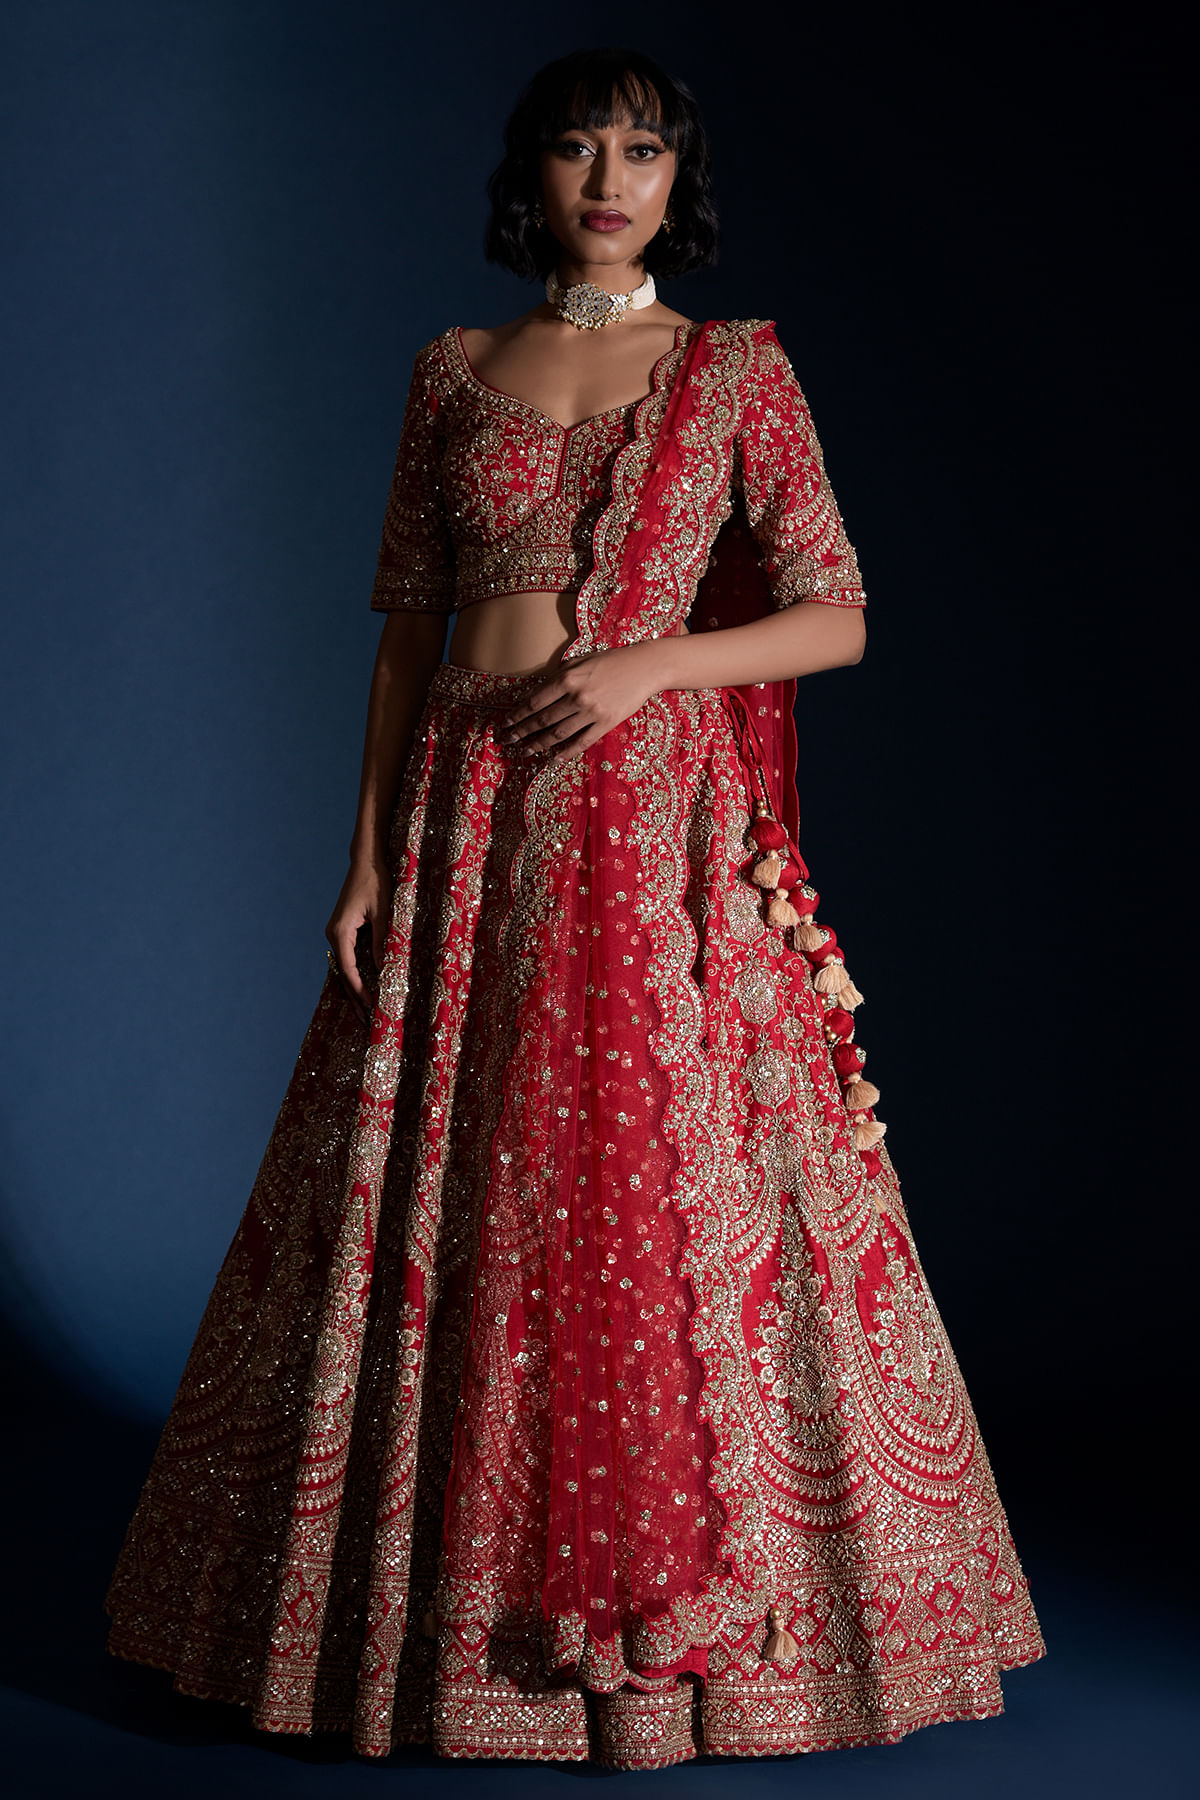 Valentine's Day Special - Red Bridal Lehengas We Loved ! - Witty Vows